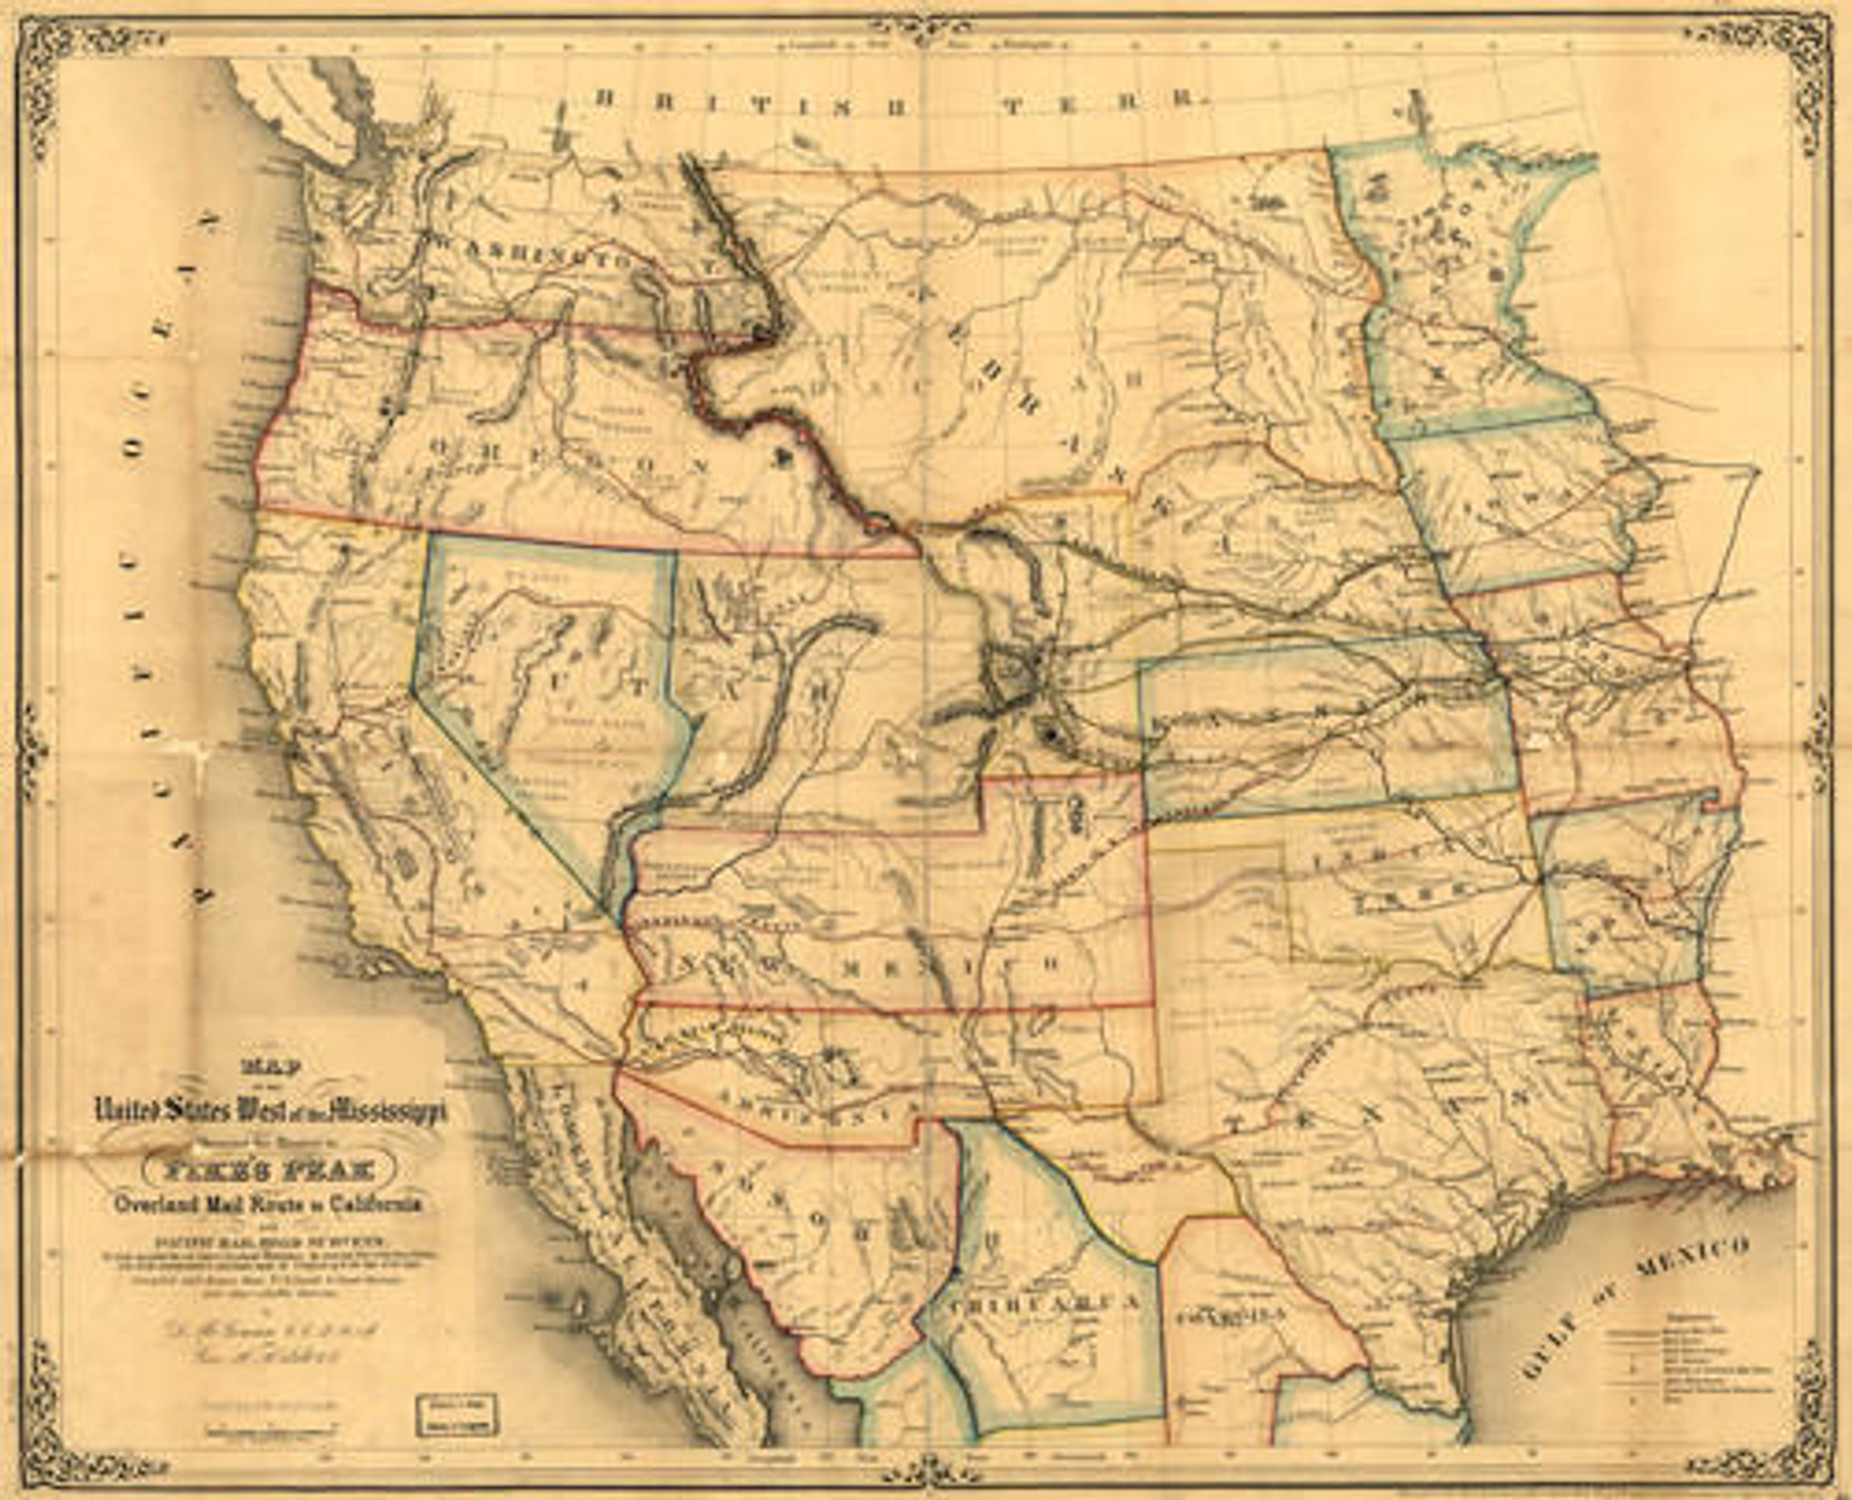 Historical Map of the United States - West of the Mississippi - 1859, image 2, World Maps Online